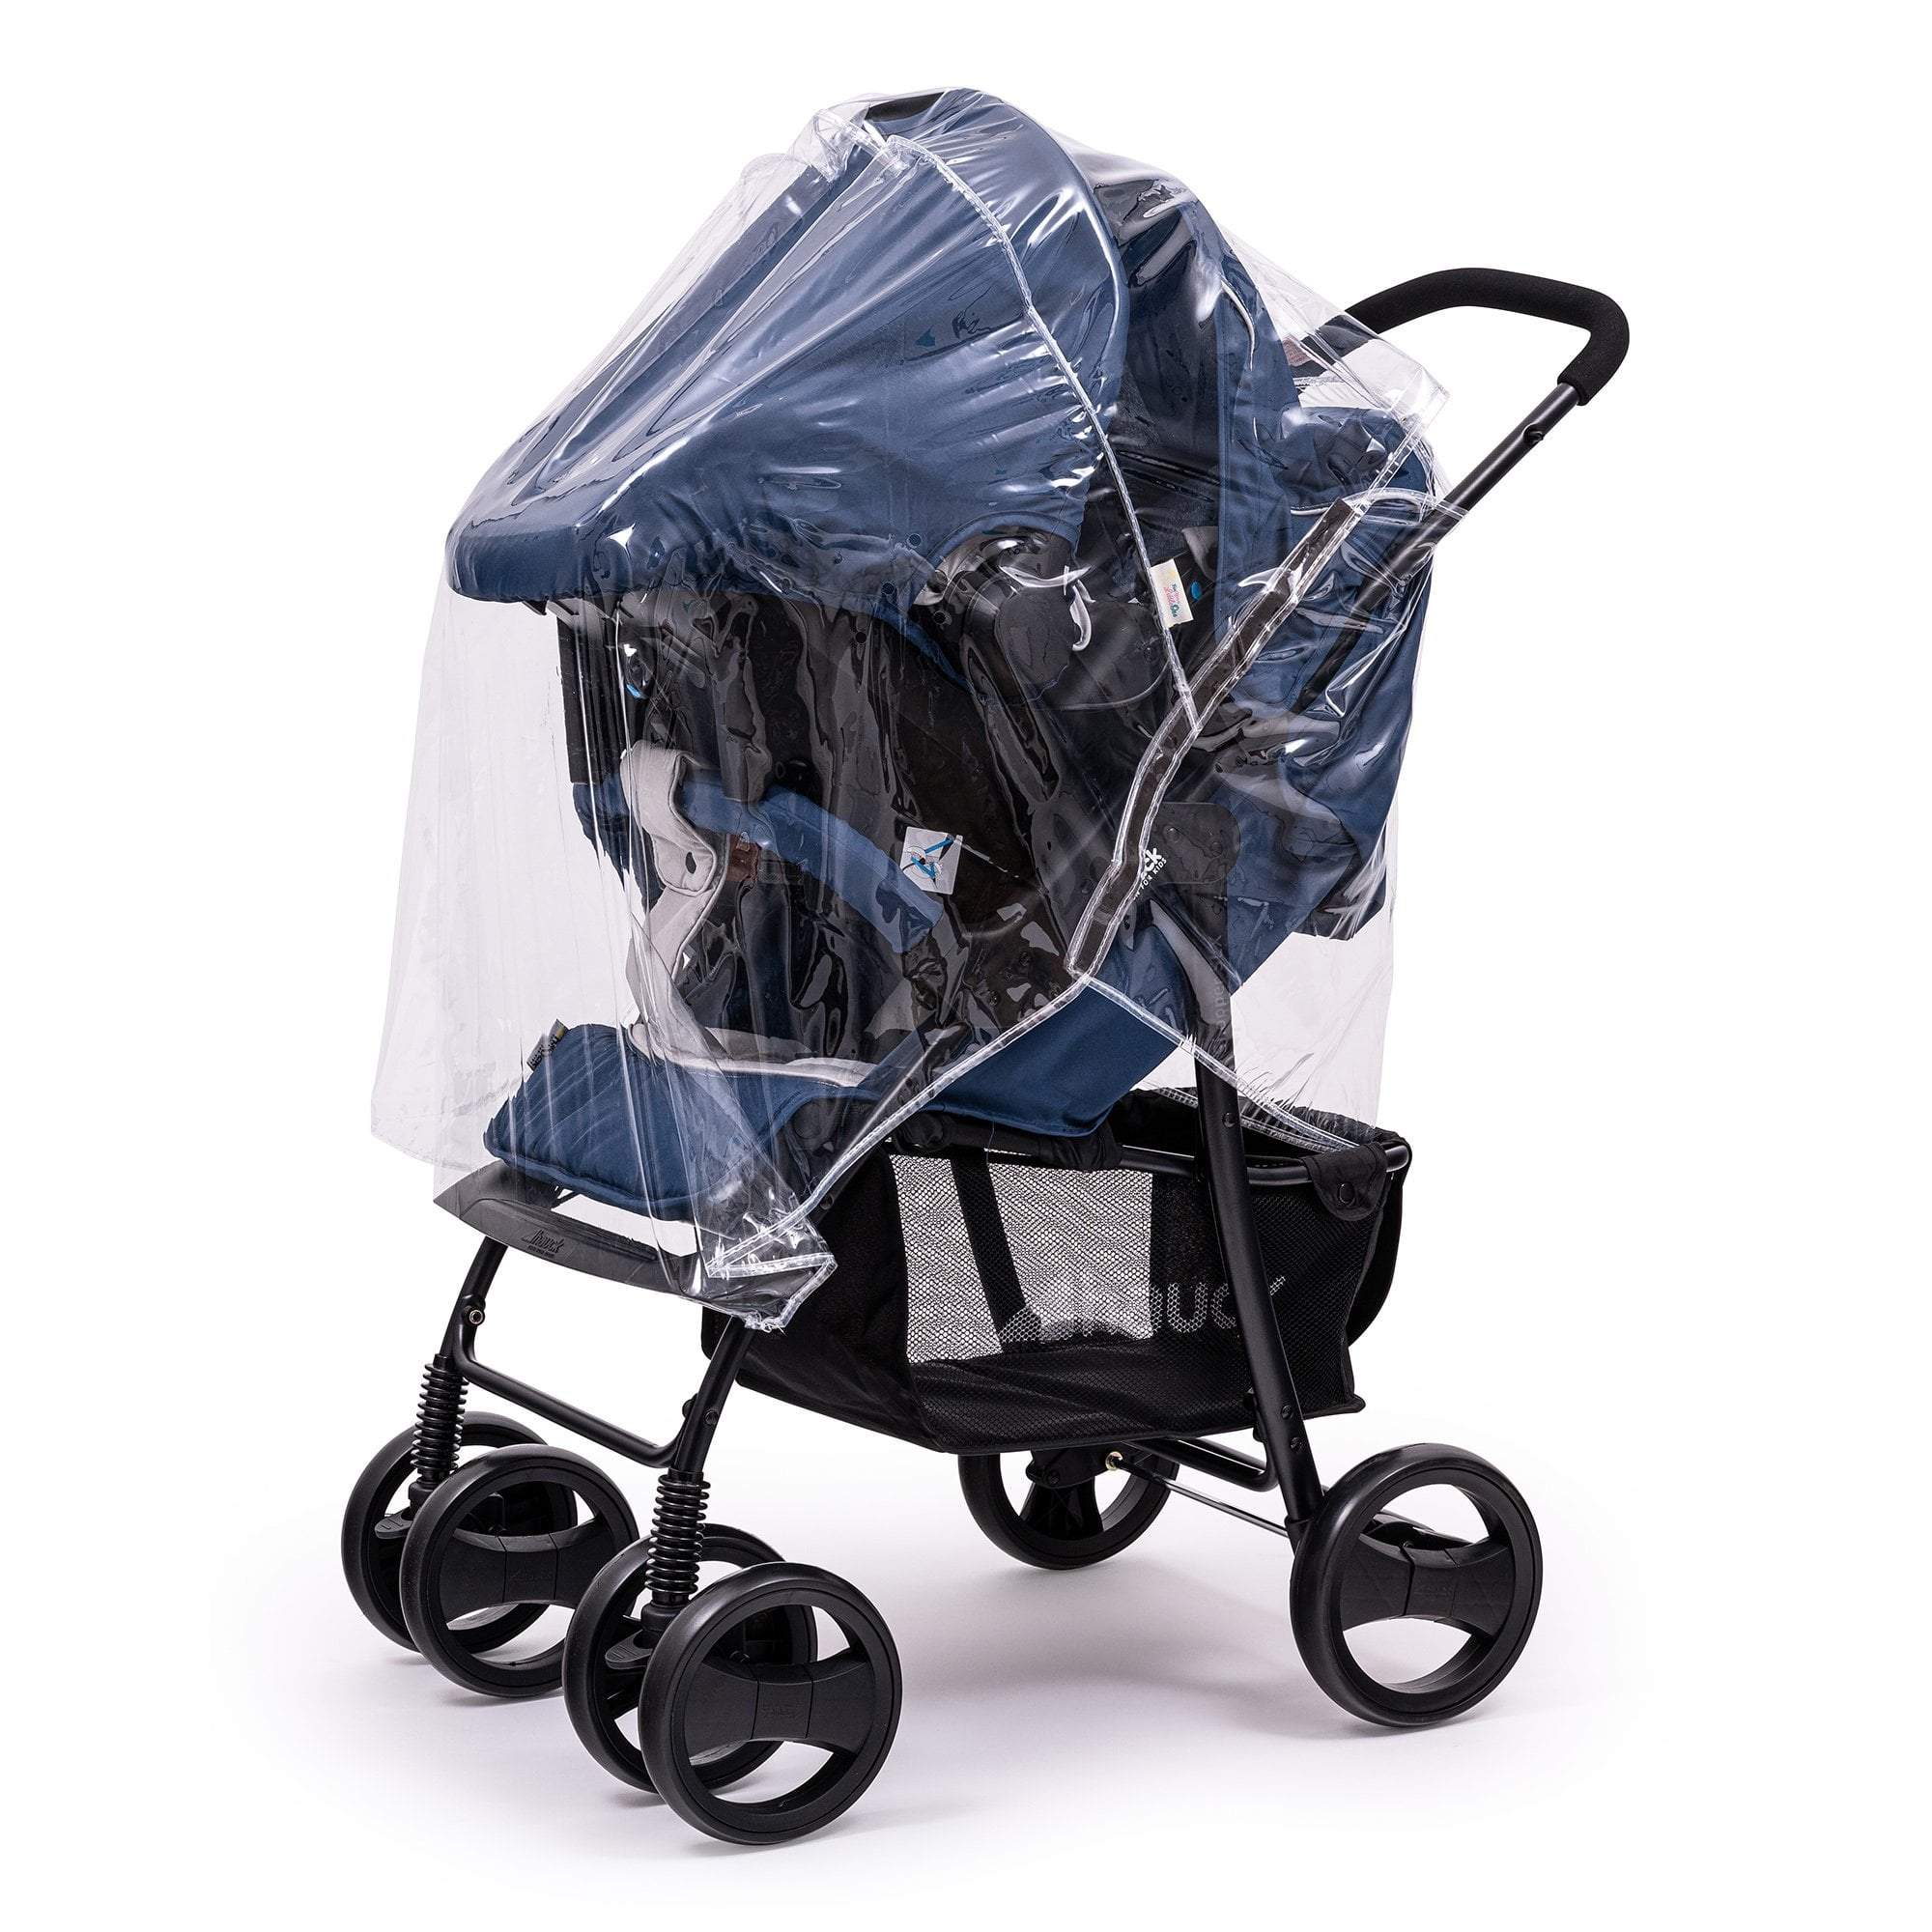 Travel System Raincover Compatible with Maxi Cosi - Fits All Models - For Your Little One